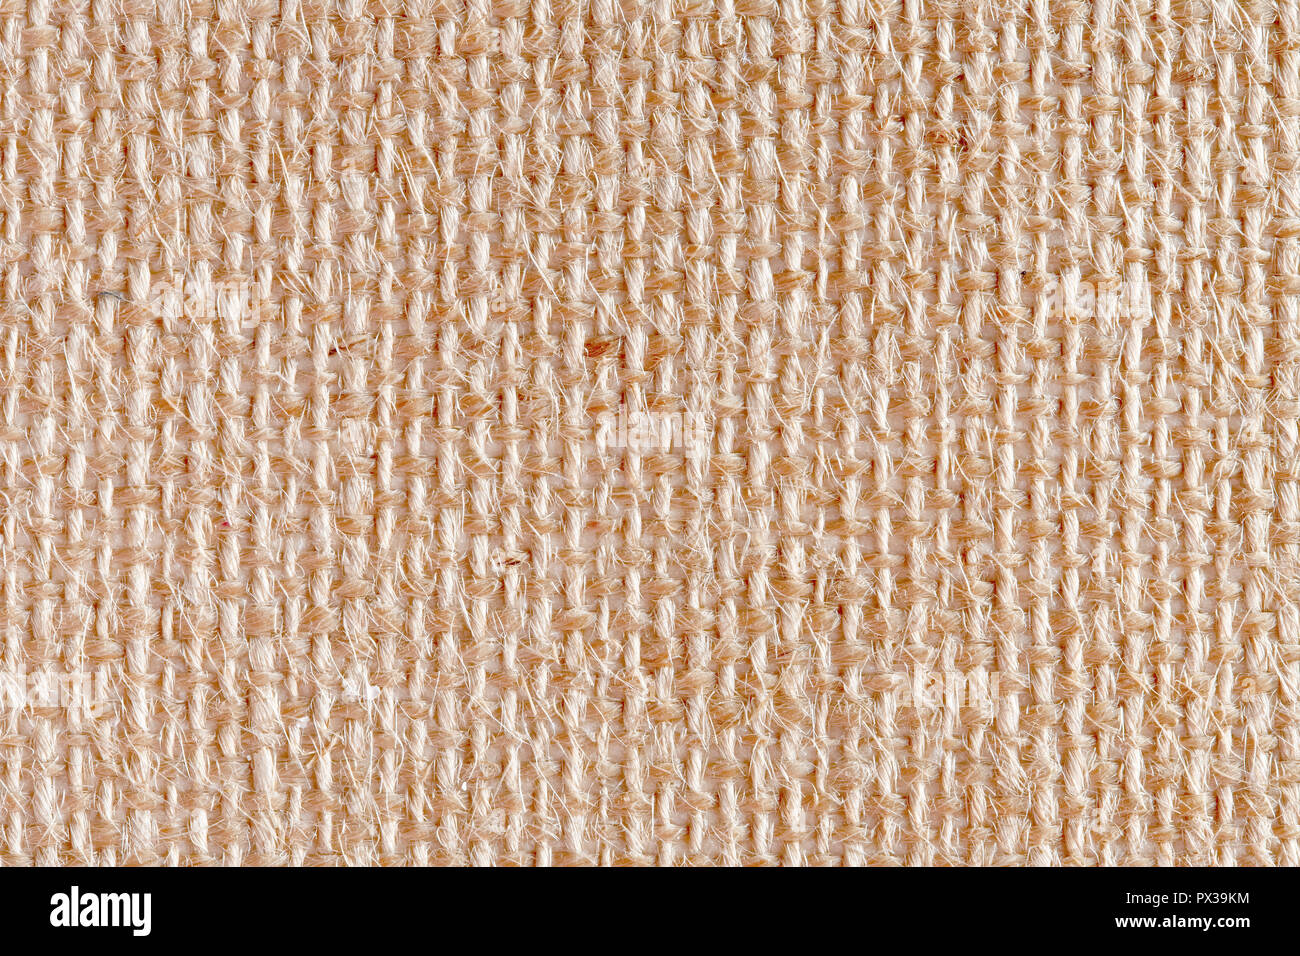 Canvas close-up. High quality natural Canvas texture. Stock Photo